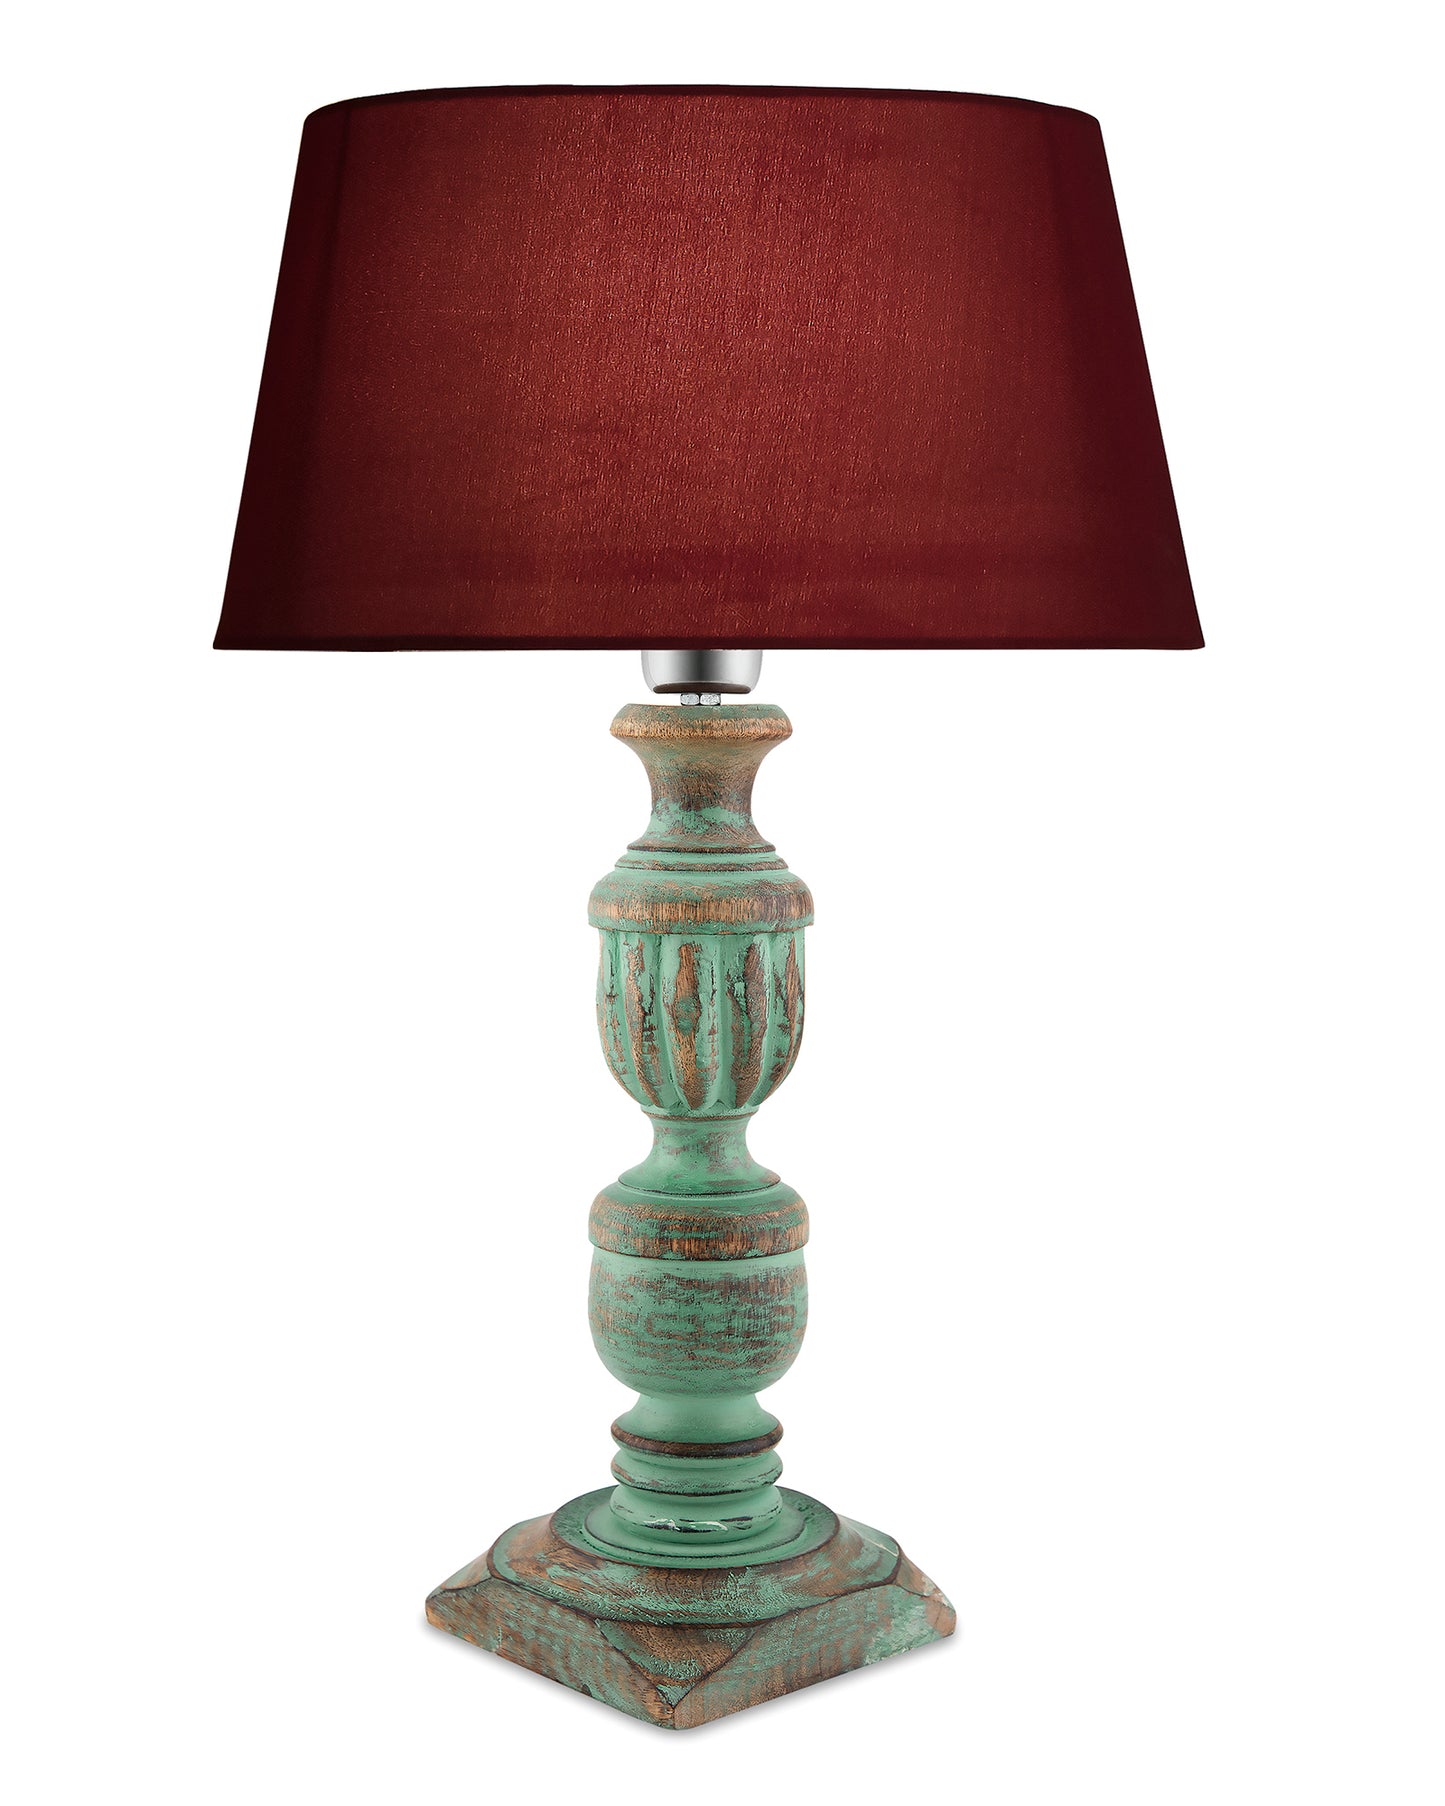 Rustic Algae French Trophy Carved Table lamp with Empire Drum Shade